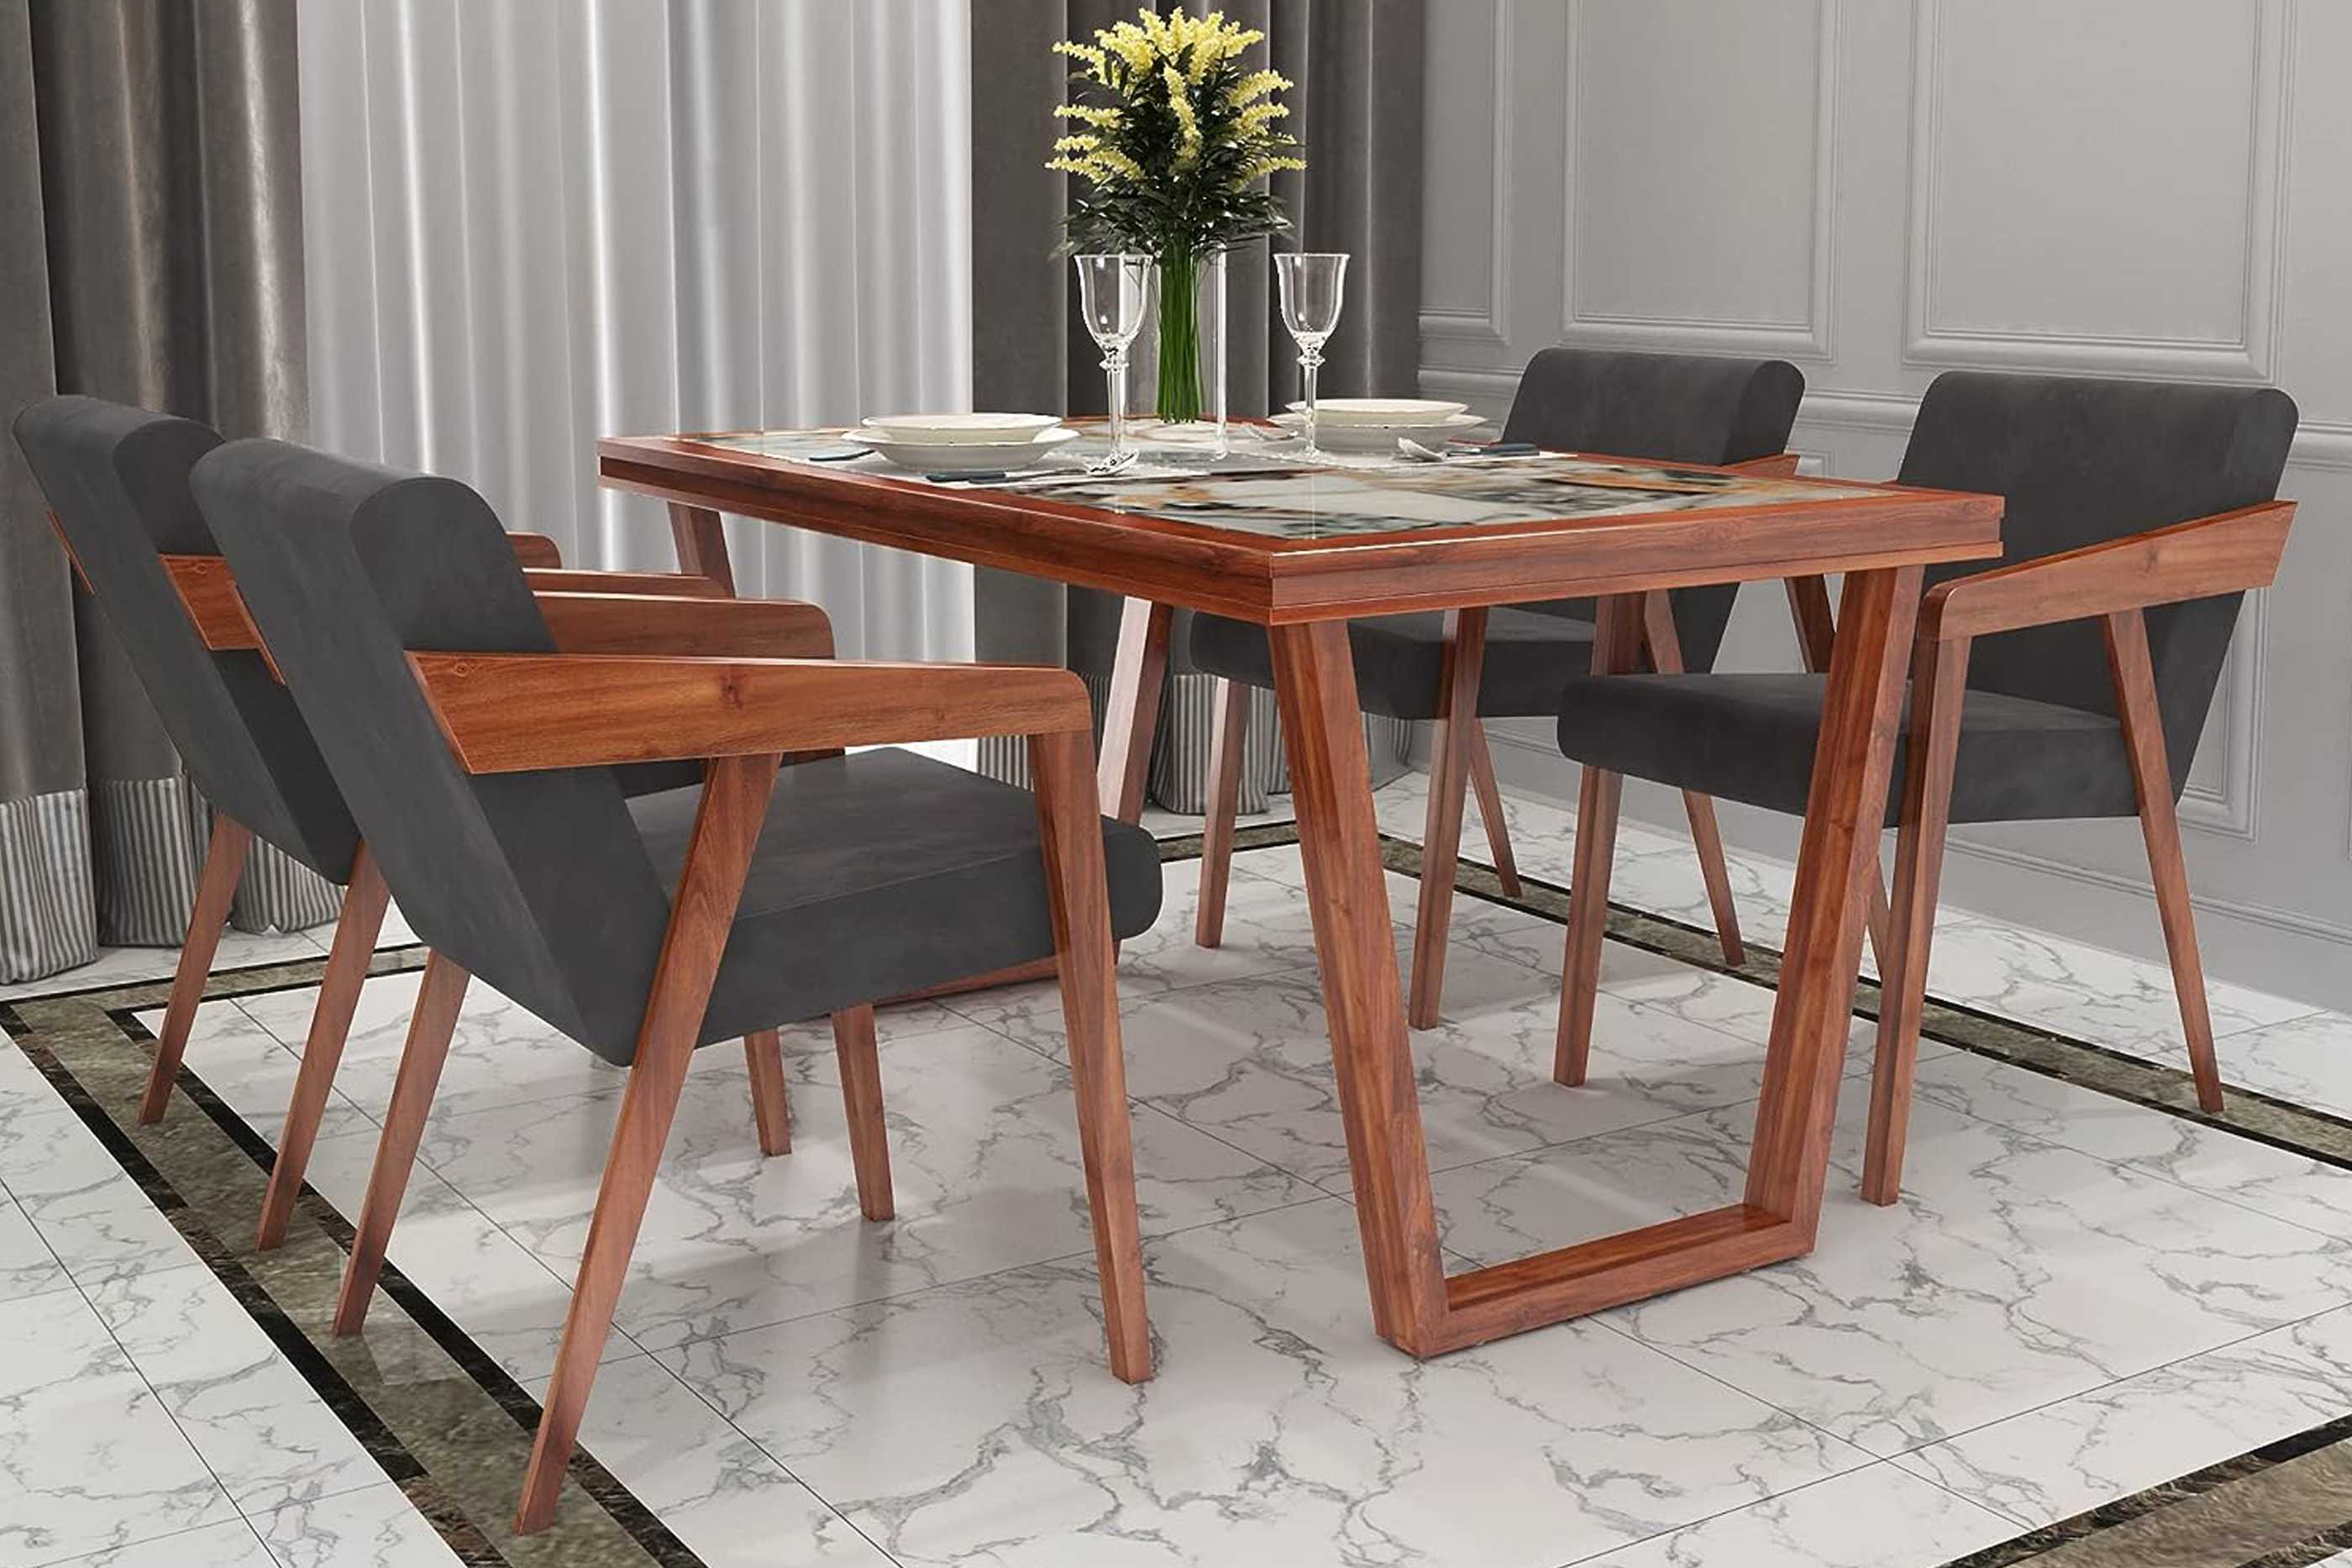 Breg dining table set with 4 chairs